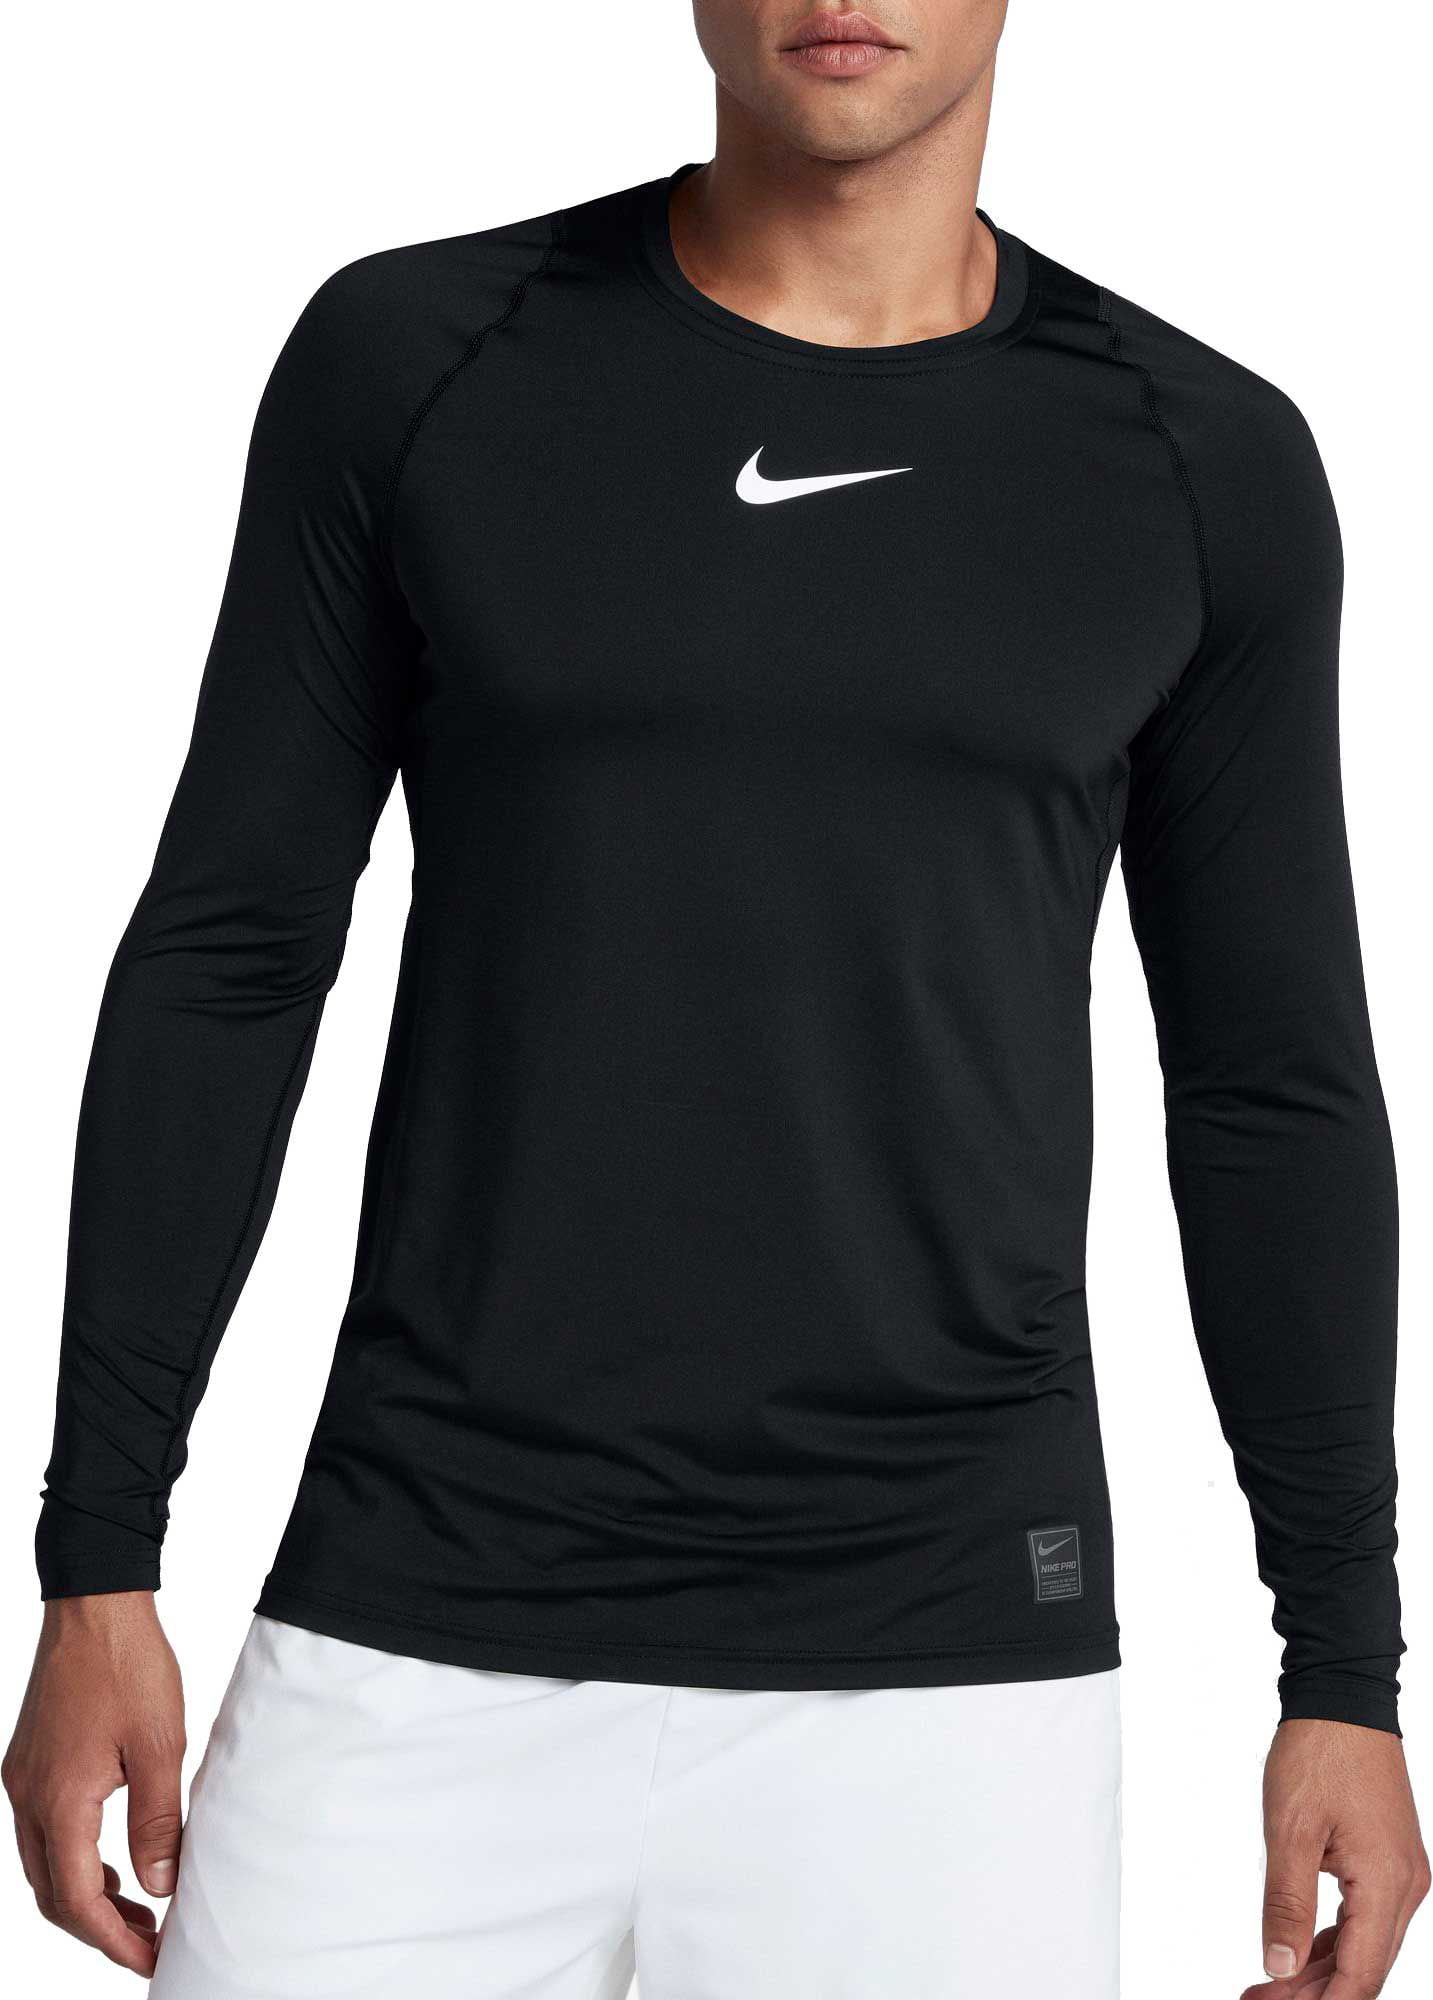 Nike Men's Pro Long Sleeve Fitted Shirt 